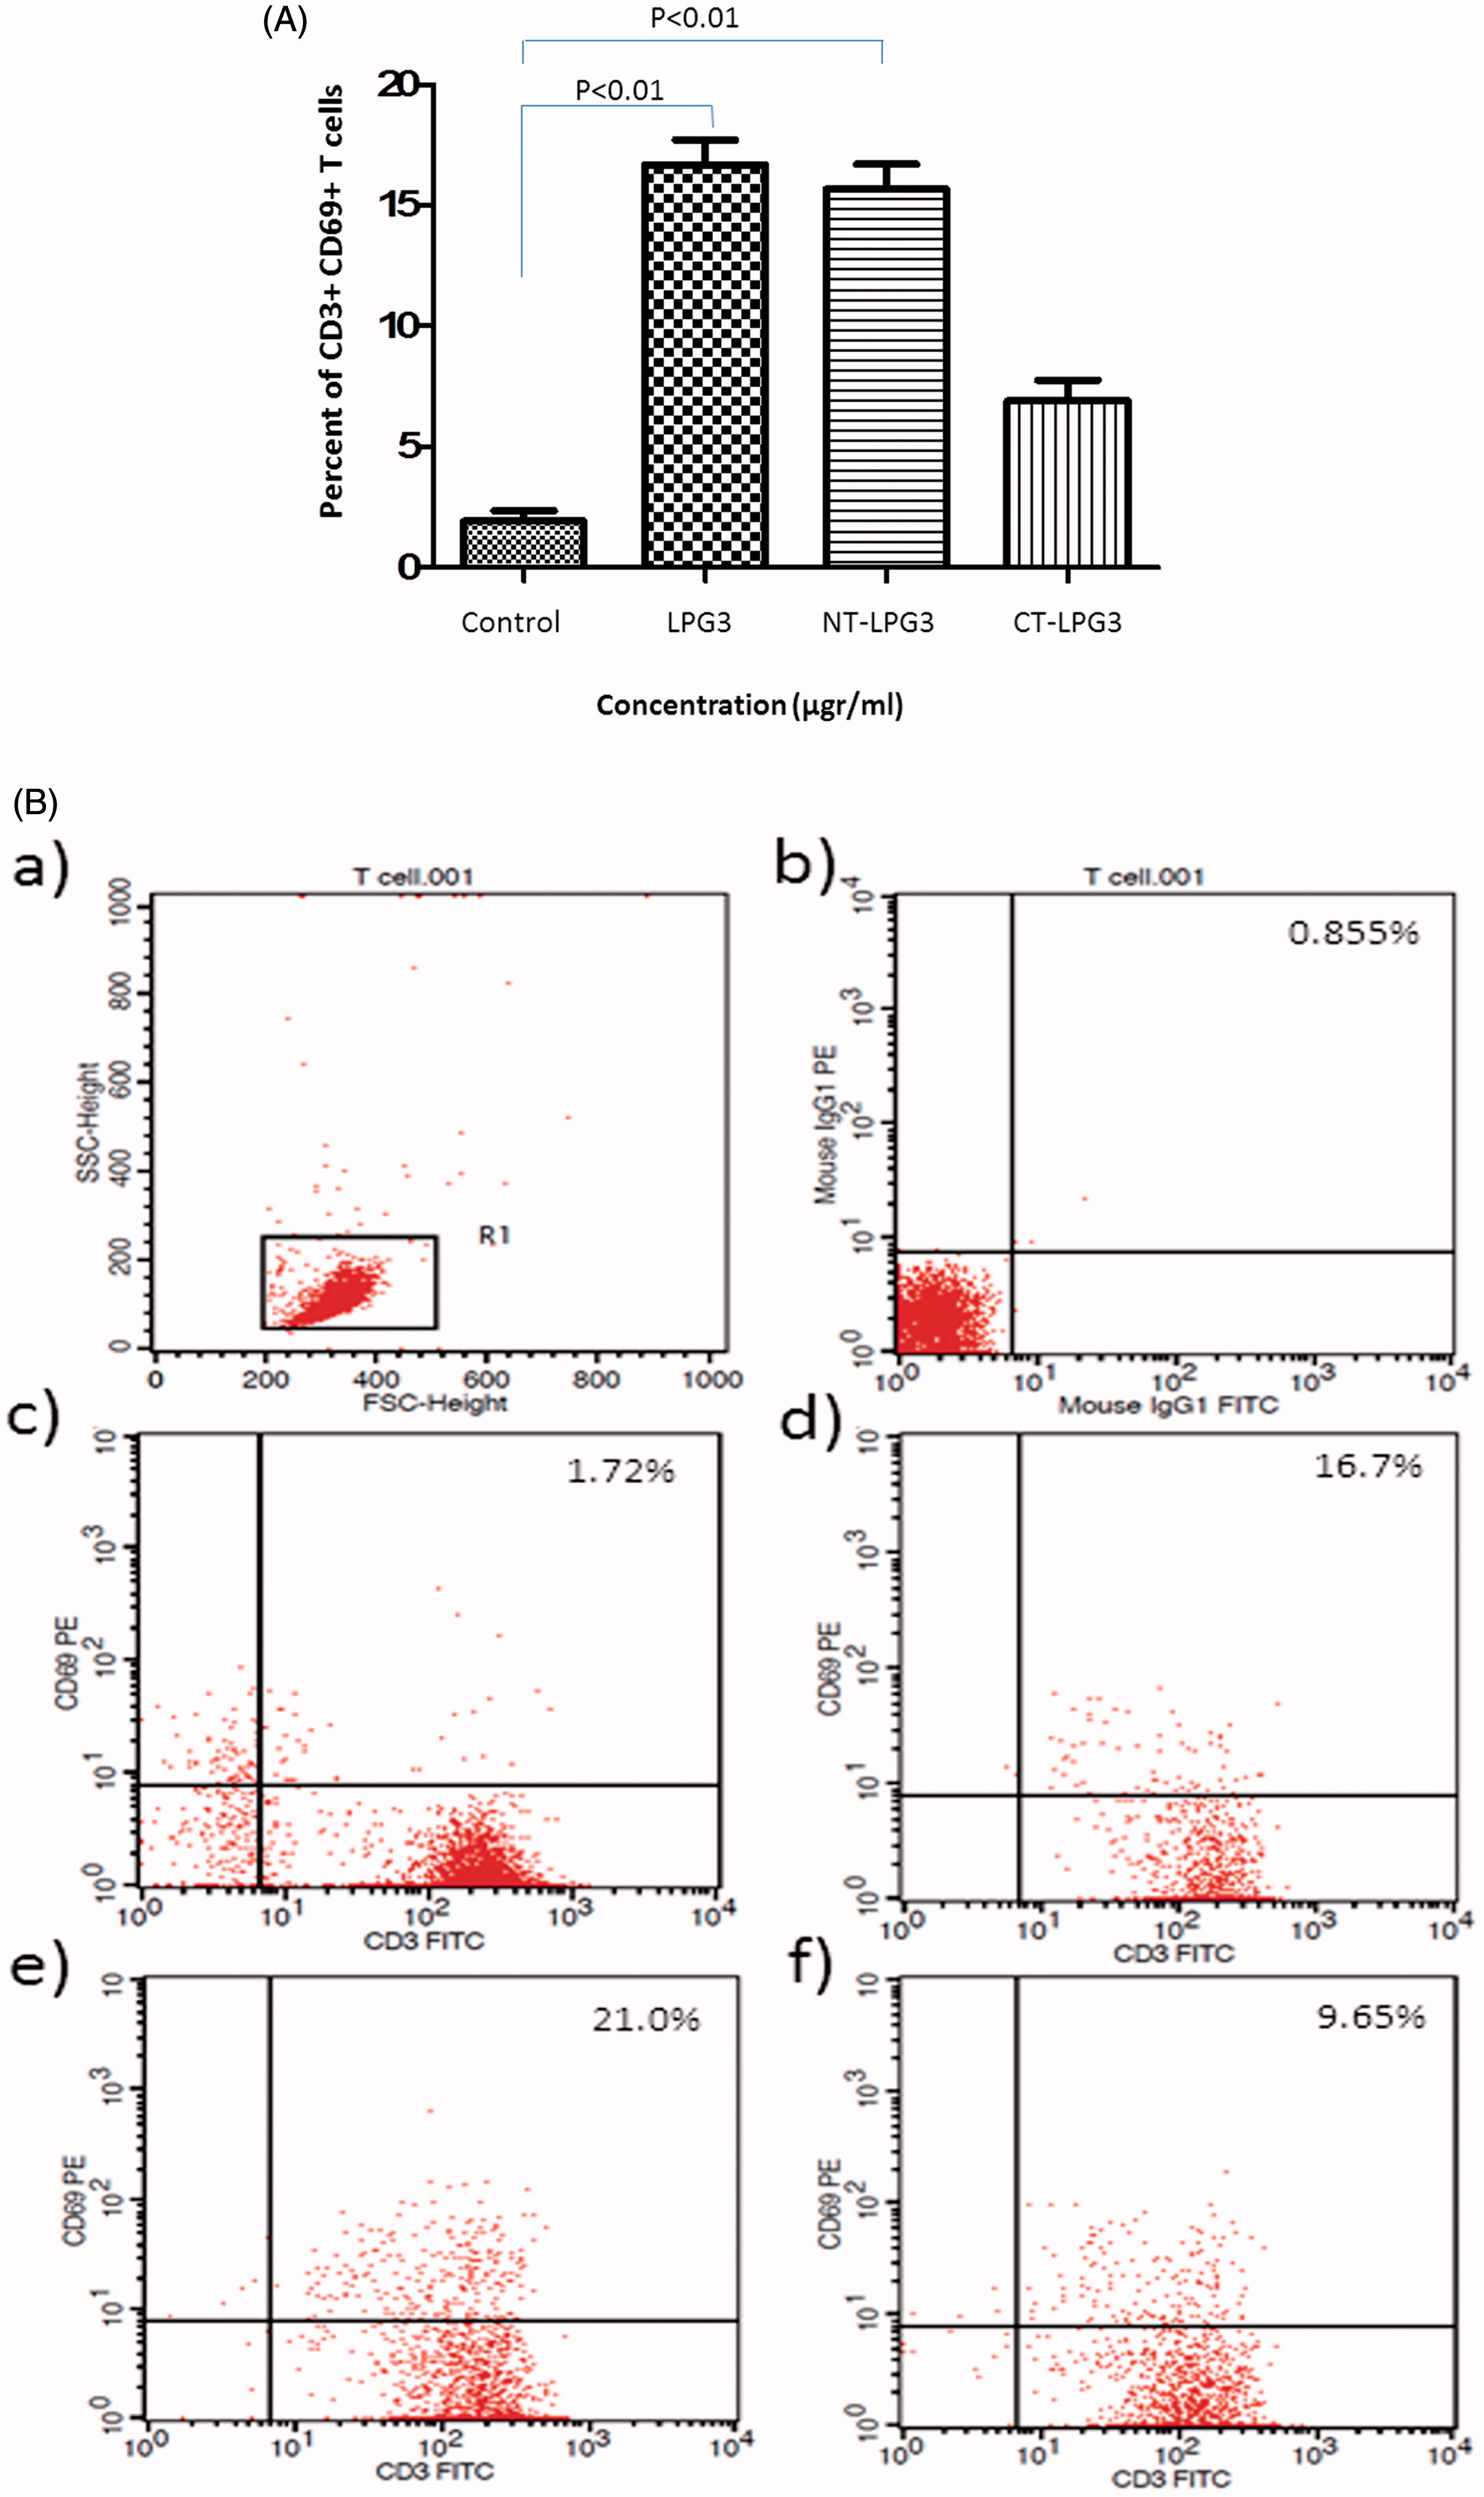 Figure 2. Flow cytometry analysis of T cells treated with rLPG3, NT-LPG3 or CT-LPG3. (A) Purified T cells were incubated with rLPG3, NT-LPG3 or CT-LPG3 for 48 h and then their level of activation examined by flow cytometry. Results shown are mean (± SD) %CD3+CD69+ T cells present. Values significantly different from control are indicated (p < 0.01). (B) Flow cytometric analysis of the T cells is presented in representative dot-blot forms: (a) Whole population of lymphocytes; (b) isotype control; (c) untreated T cells; (d) T cells treated with rLPG3; (e) T cells treated with NT-rLPG3; and (f) T cells treated with CT-rLPG3.